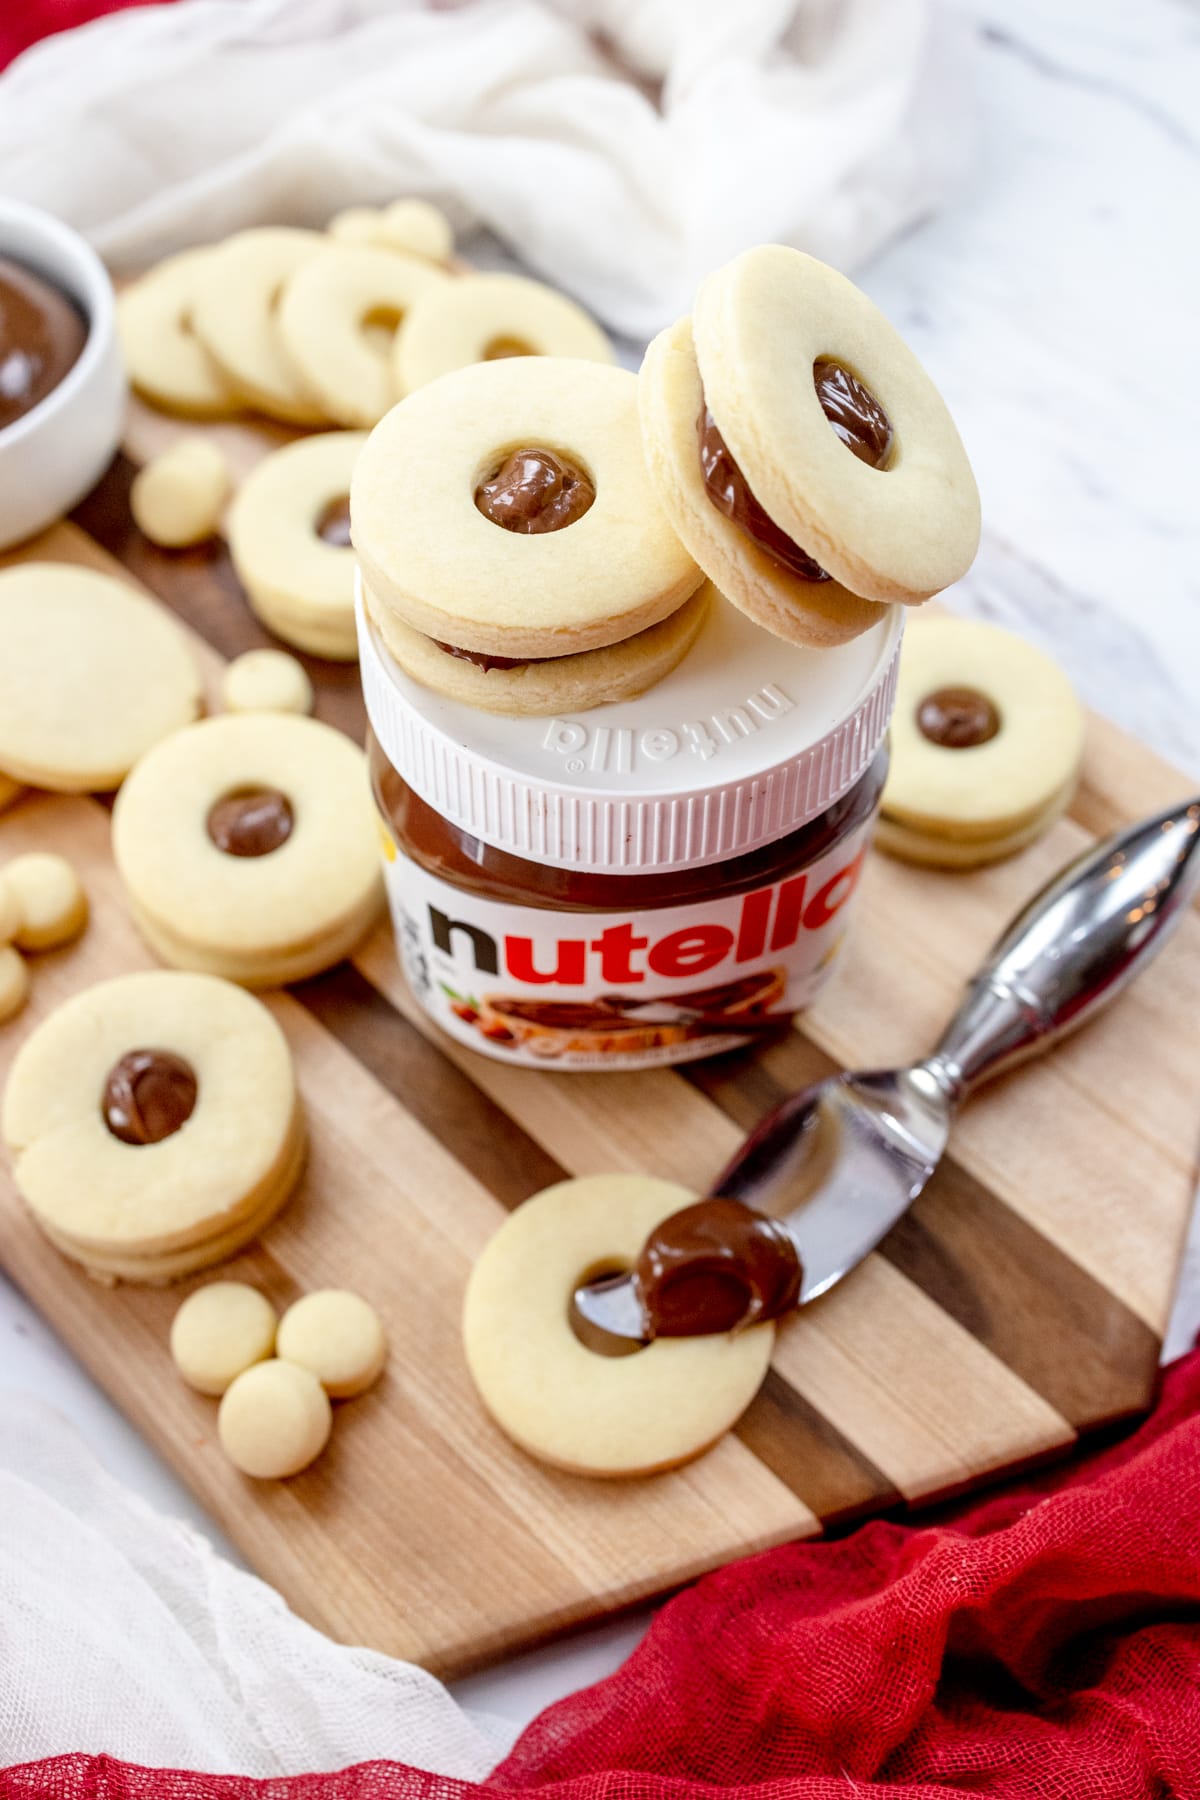 Close up of a prepping area that has a chopping board, Nutella jar with two finished cookies on top, a bowl of nutella, a knife with chocolate spread on it, with unfinished and finished baked cookies around them.